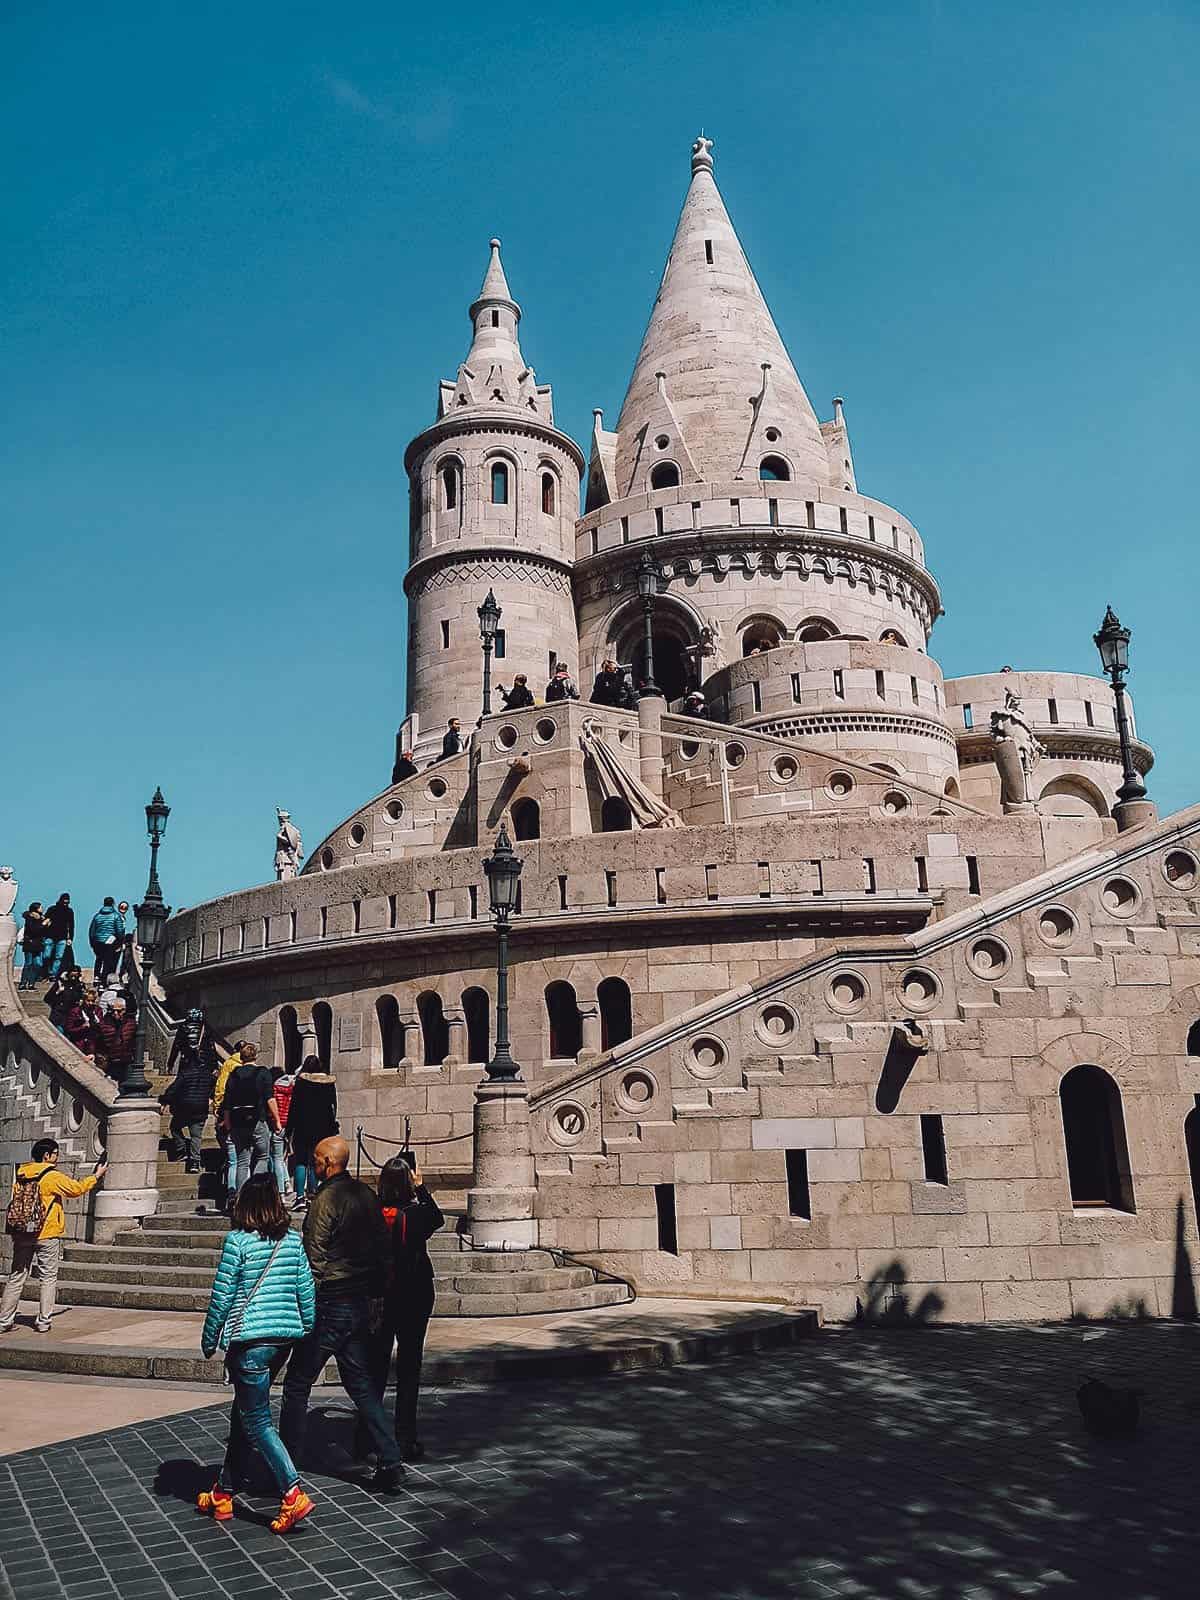 Fisherman's Bastion on Castle Hill in Budapest, Hungary